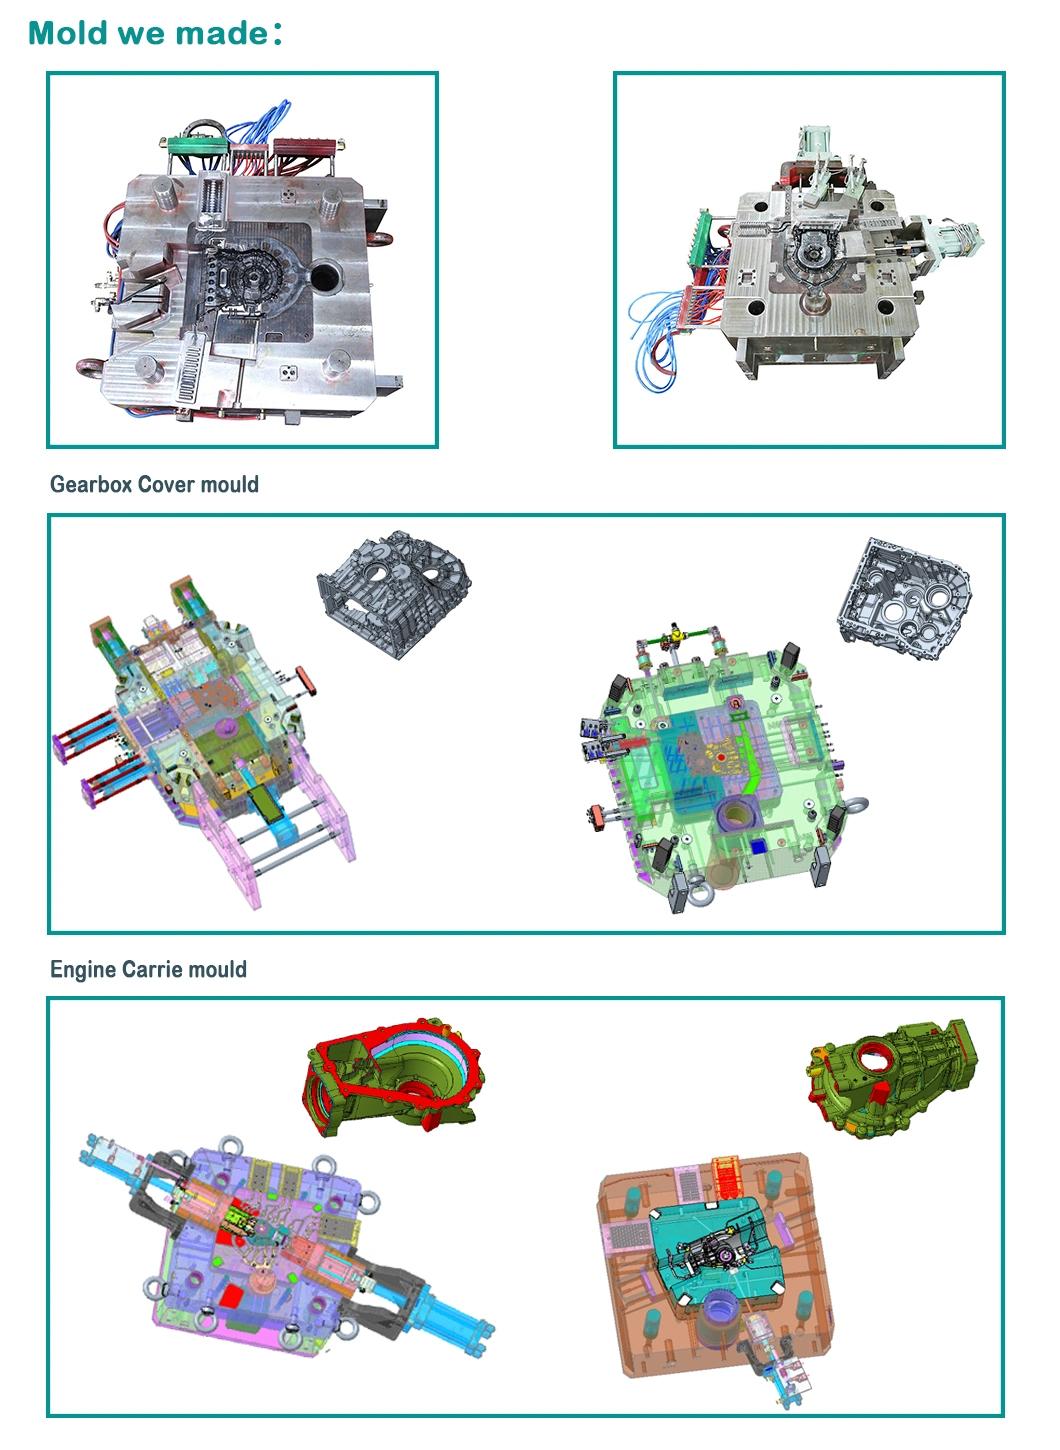 Free Sample Competitive Price Customized Injection Molding Aluminium Die Casting Die Die Casting Mold for Automotive Telecommunication Electronic Household